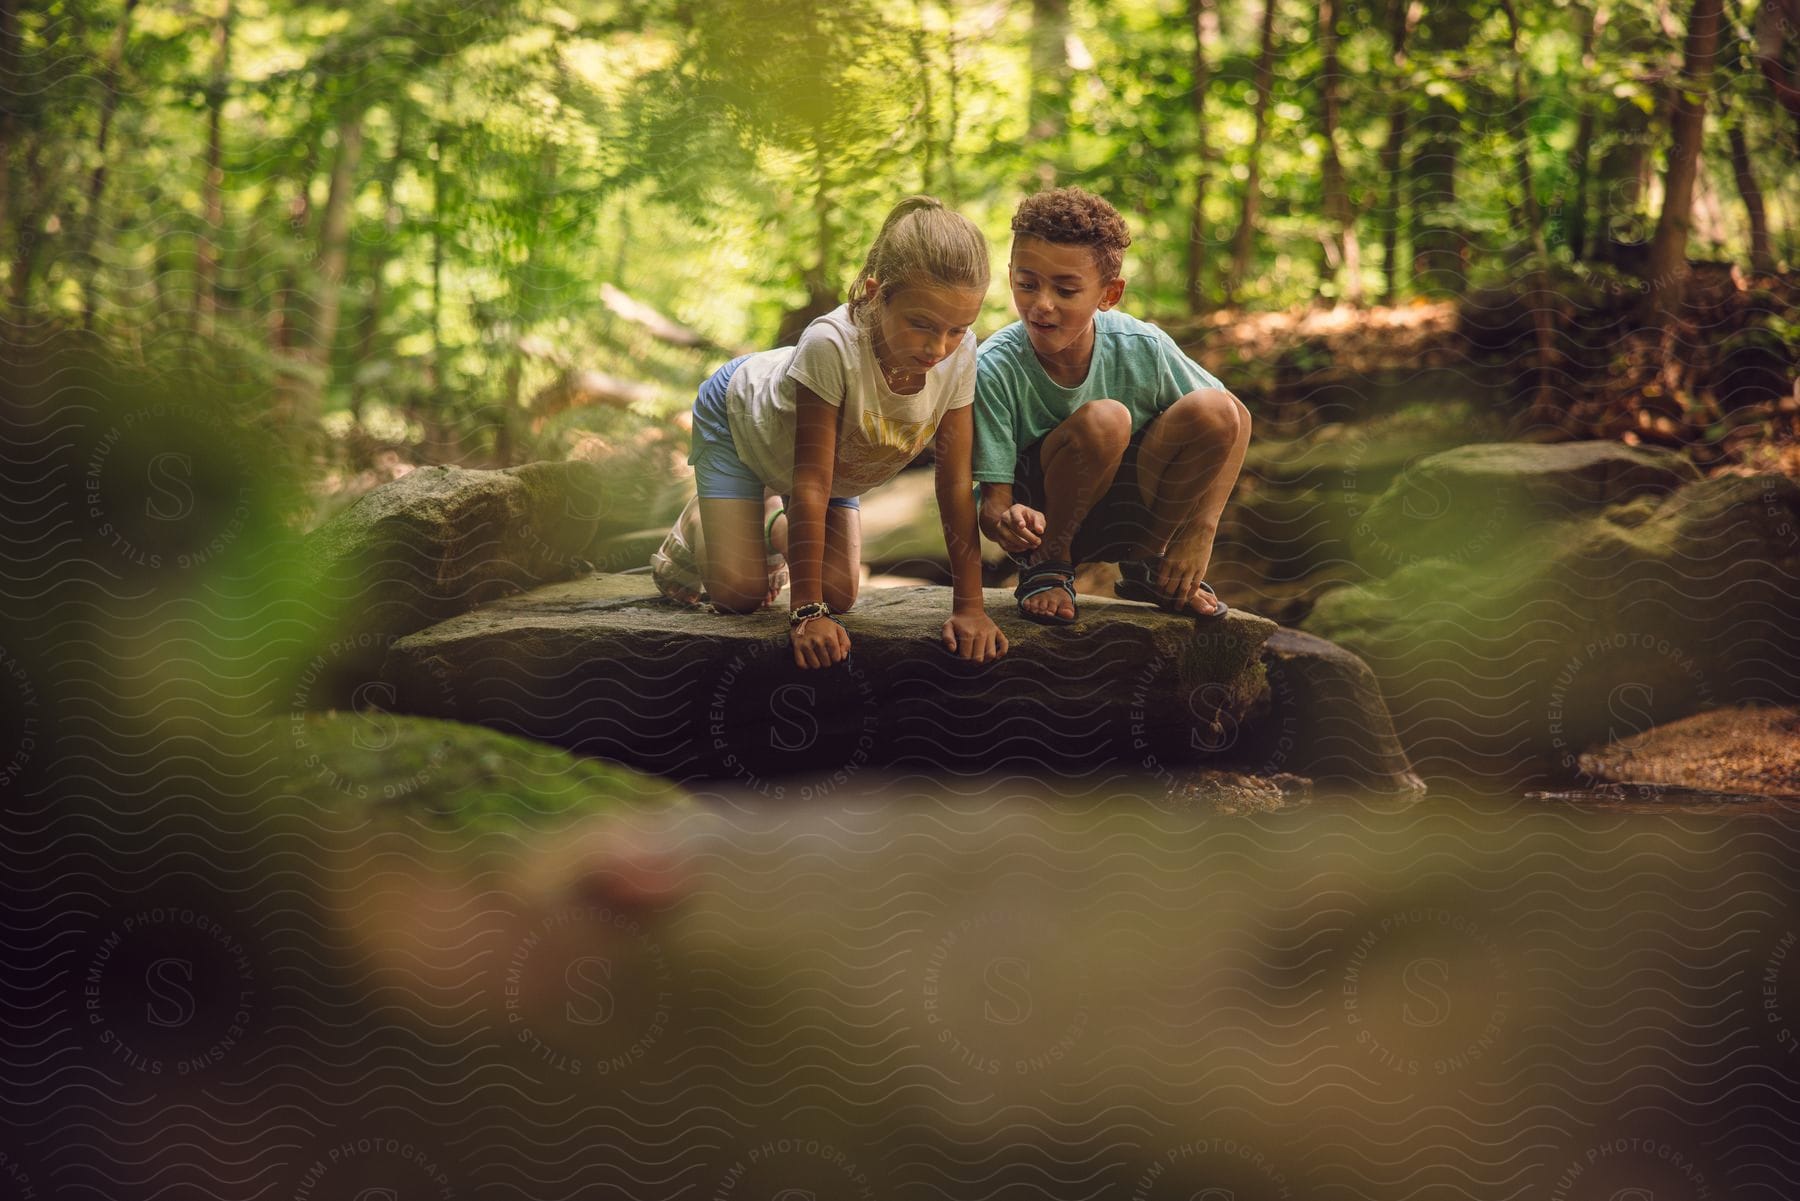 A young boy and girl are atop a rock as they happily look into a creek located in under a grove of trees.